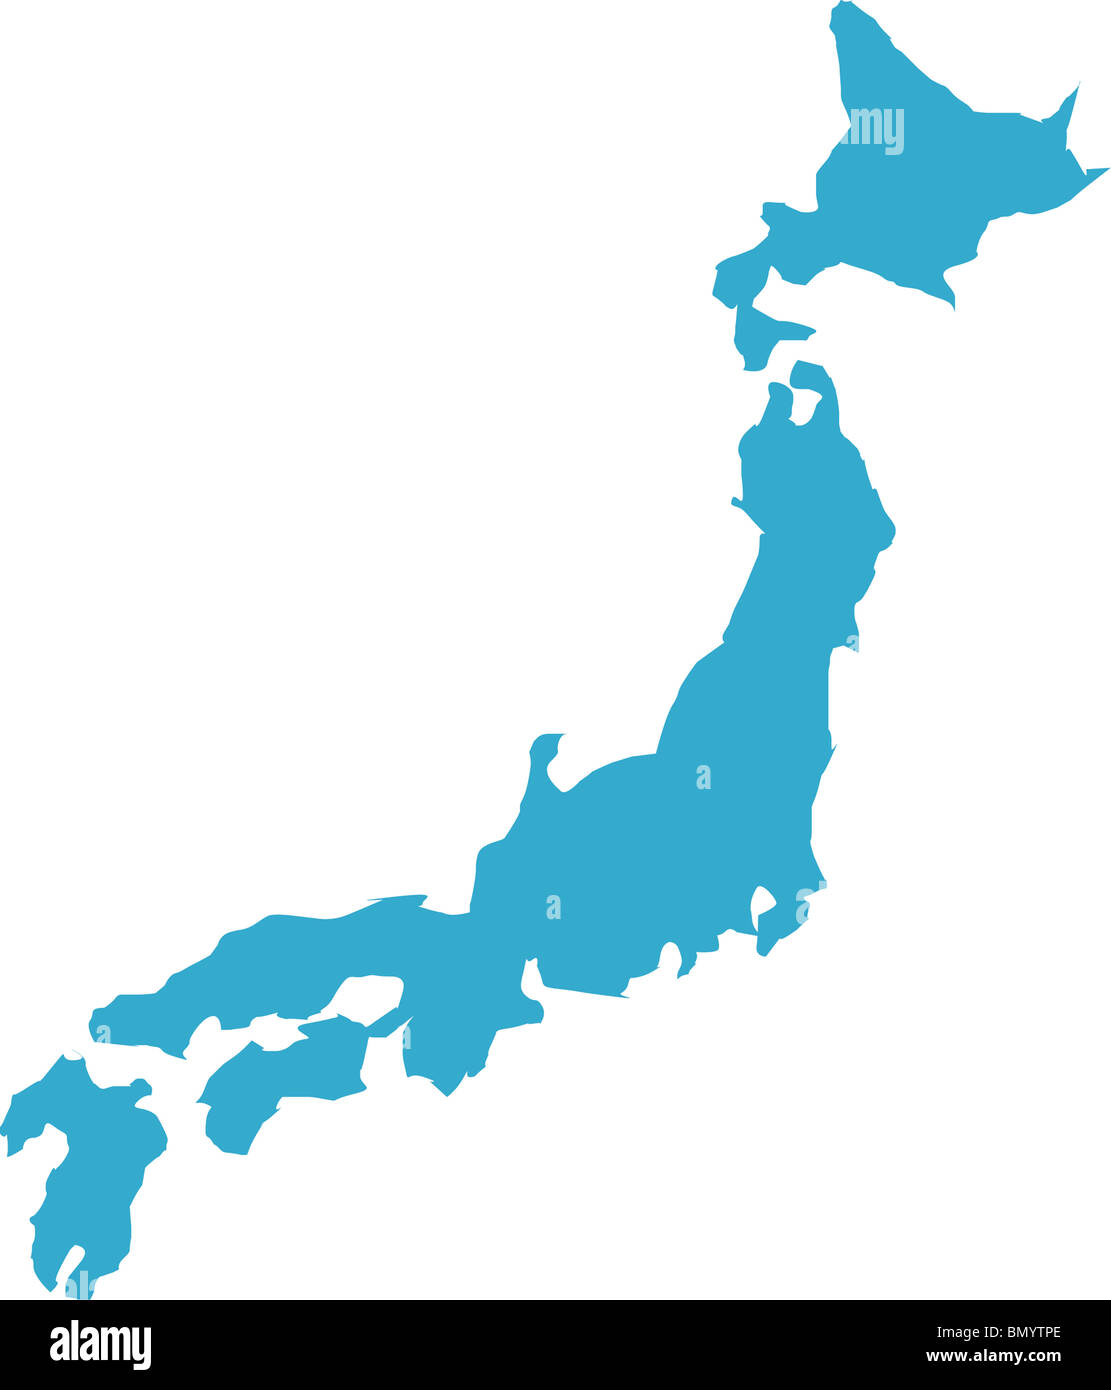 There is a map of Japan country Stock Photo